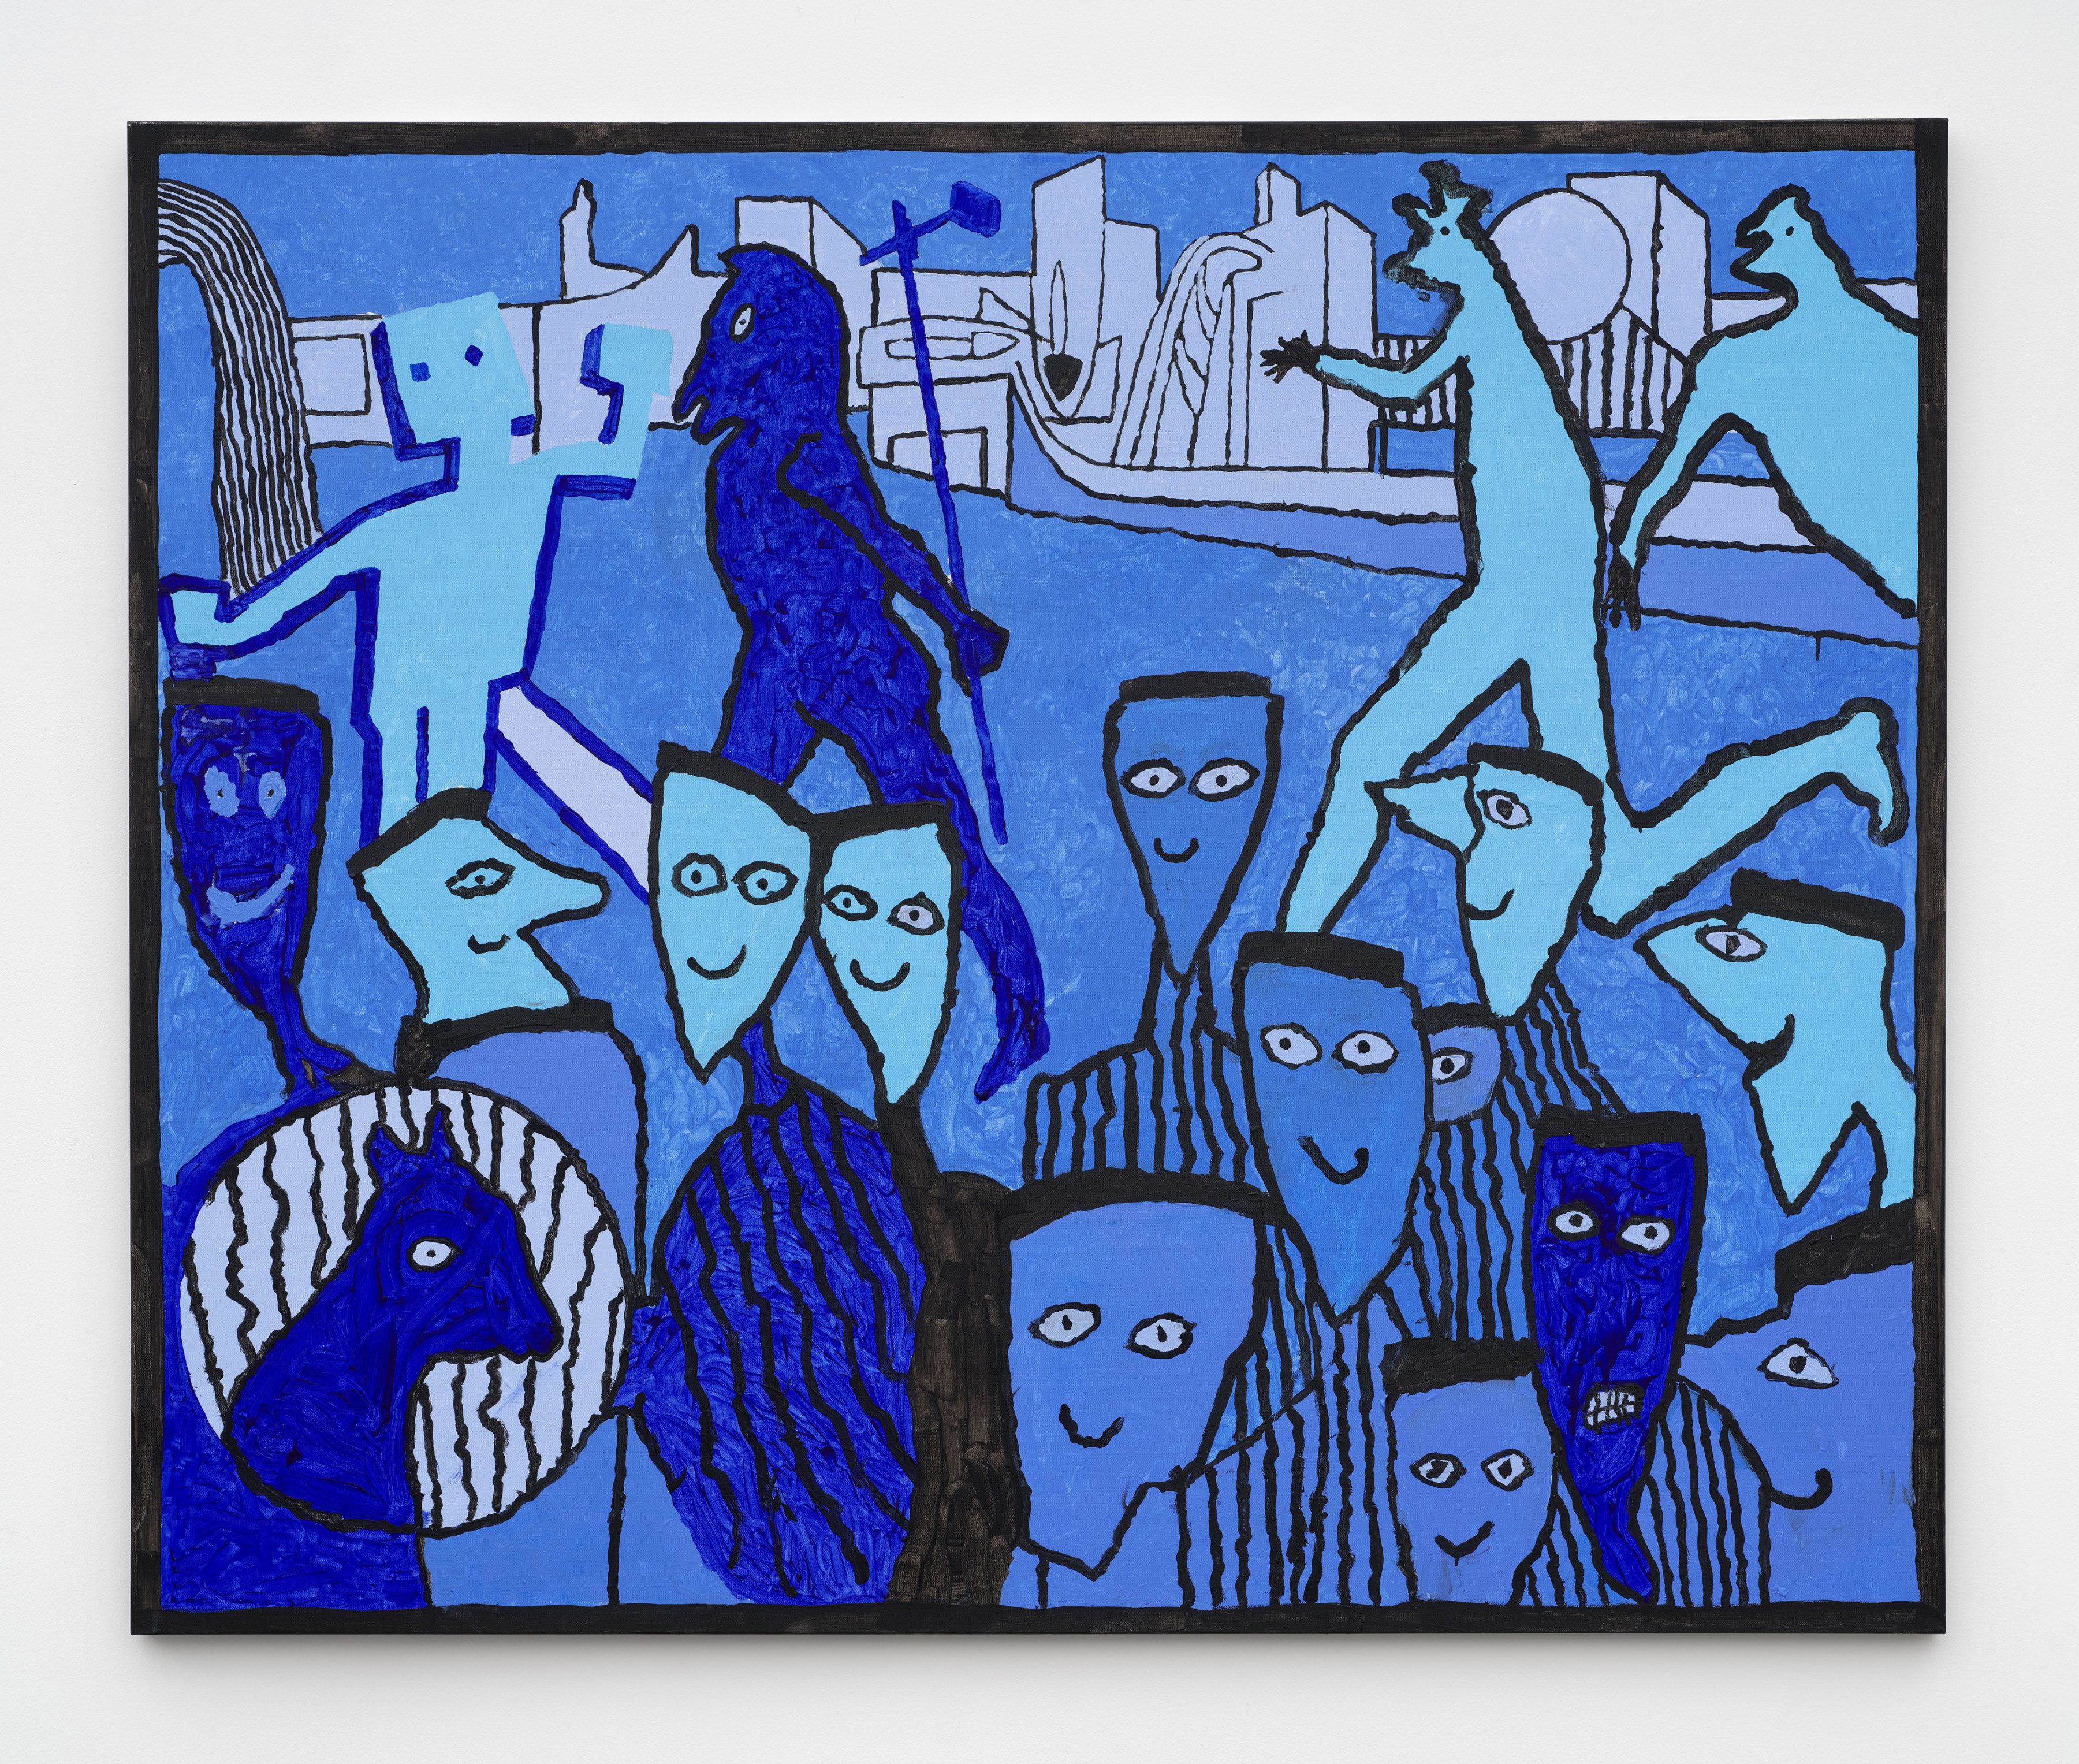 A painting of blue people with wide eyes in a city scape with anthropomorphic figures running behind them.